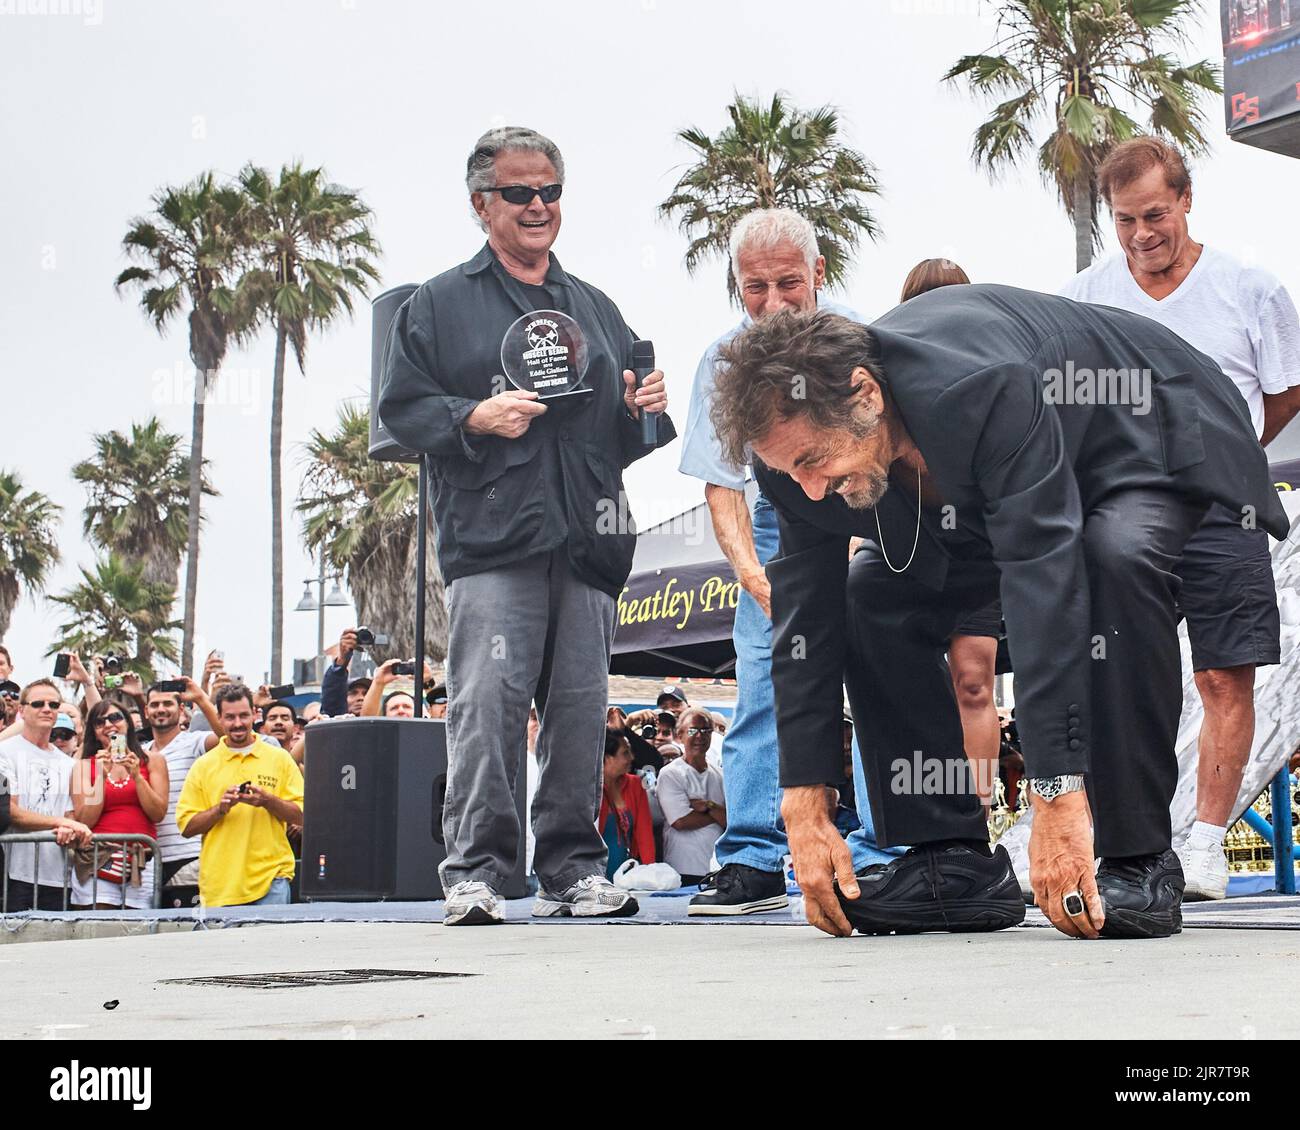 Venice, California, USA. 4th July, 2012. Al Pacino at Muscle Beach telling the crowd he was going to stand on his hands. After inducting his long time friend and personal fitness trainer Eddie Guiliani into the Muscle Beach Hall Of Fame. (Credit Image: © Ian L. Sitren/ZUMA Press Wire) Stock Photo